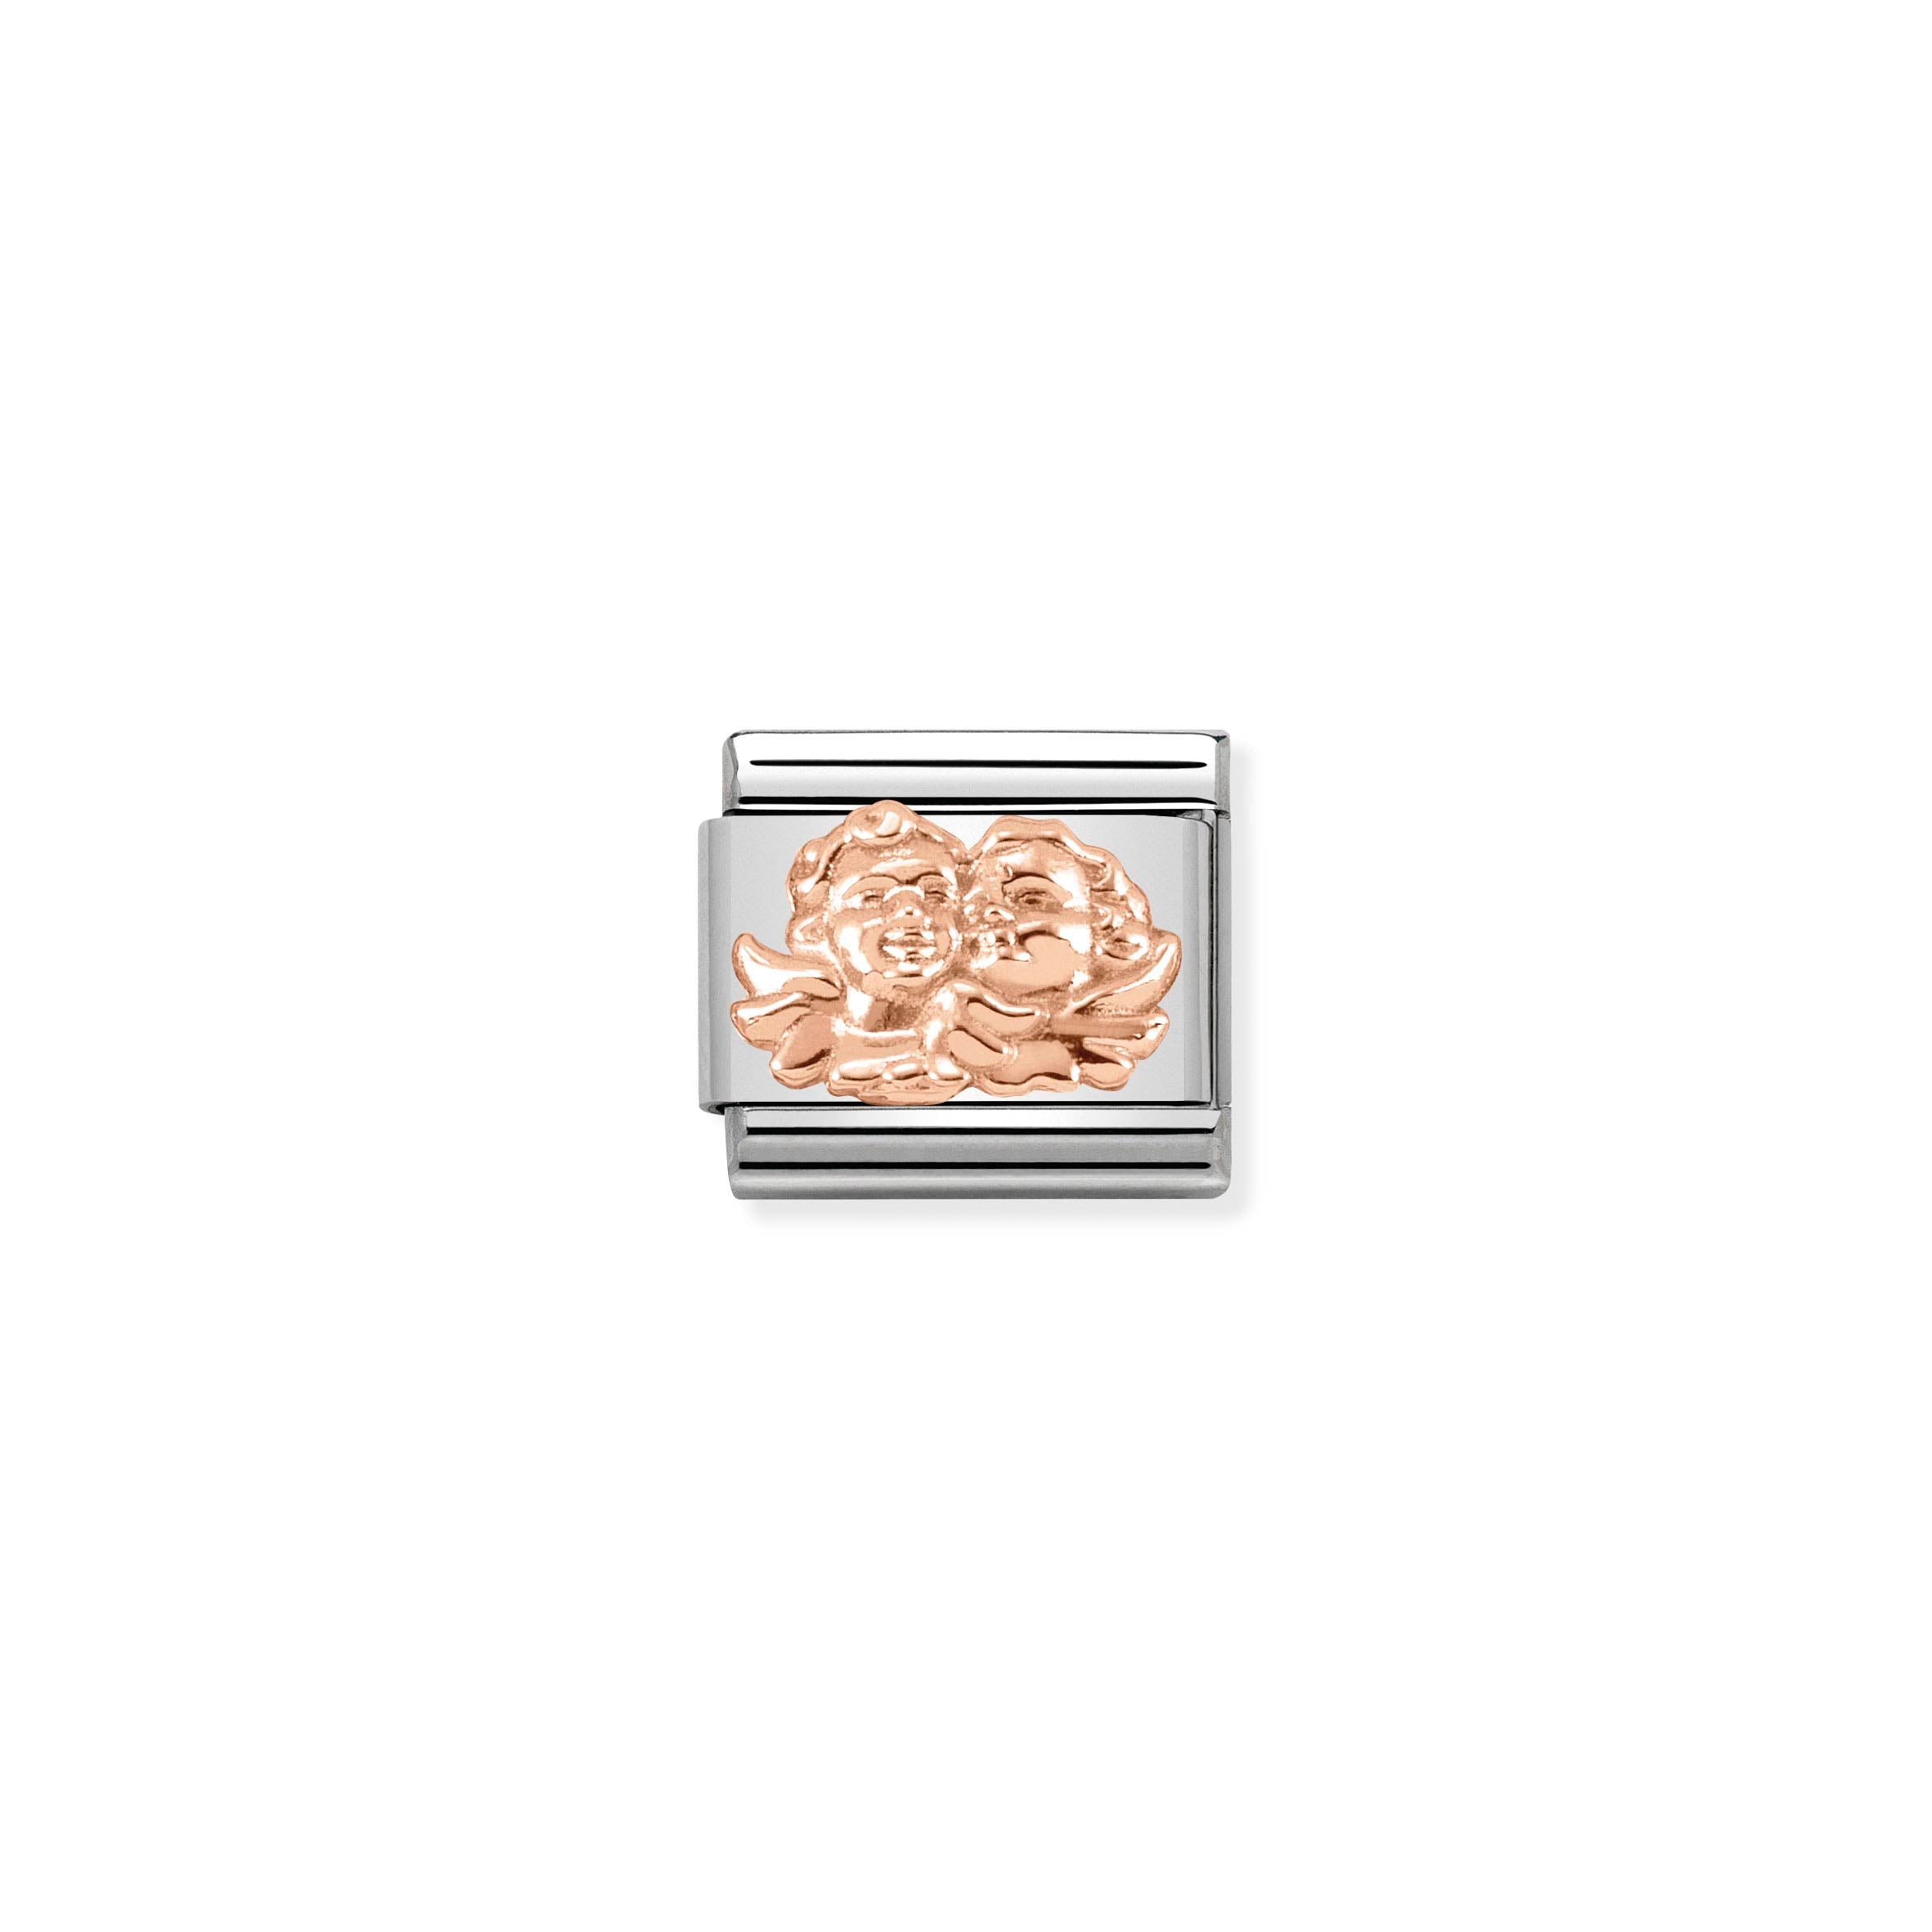 NOMINATION - Composable Classic RELIEF SYMBOLS st/steel & 9ct rose gold (Angel of family)